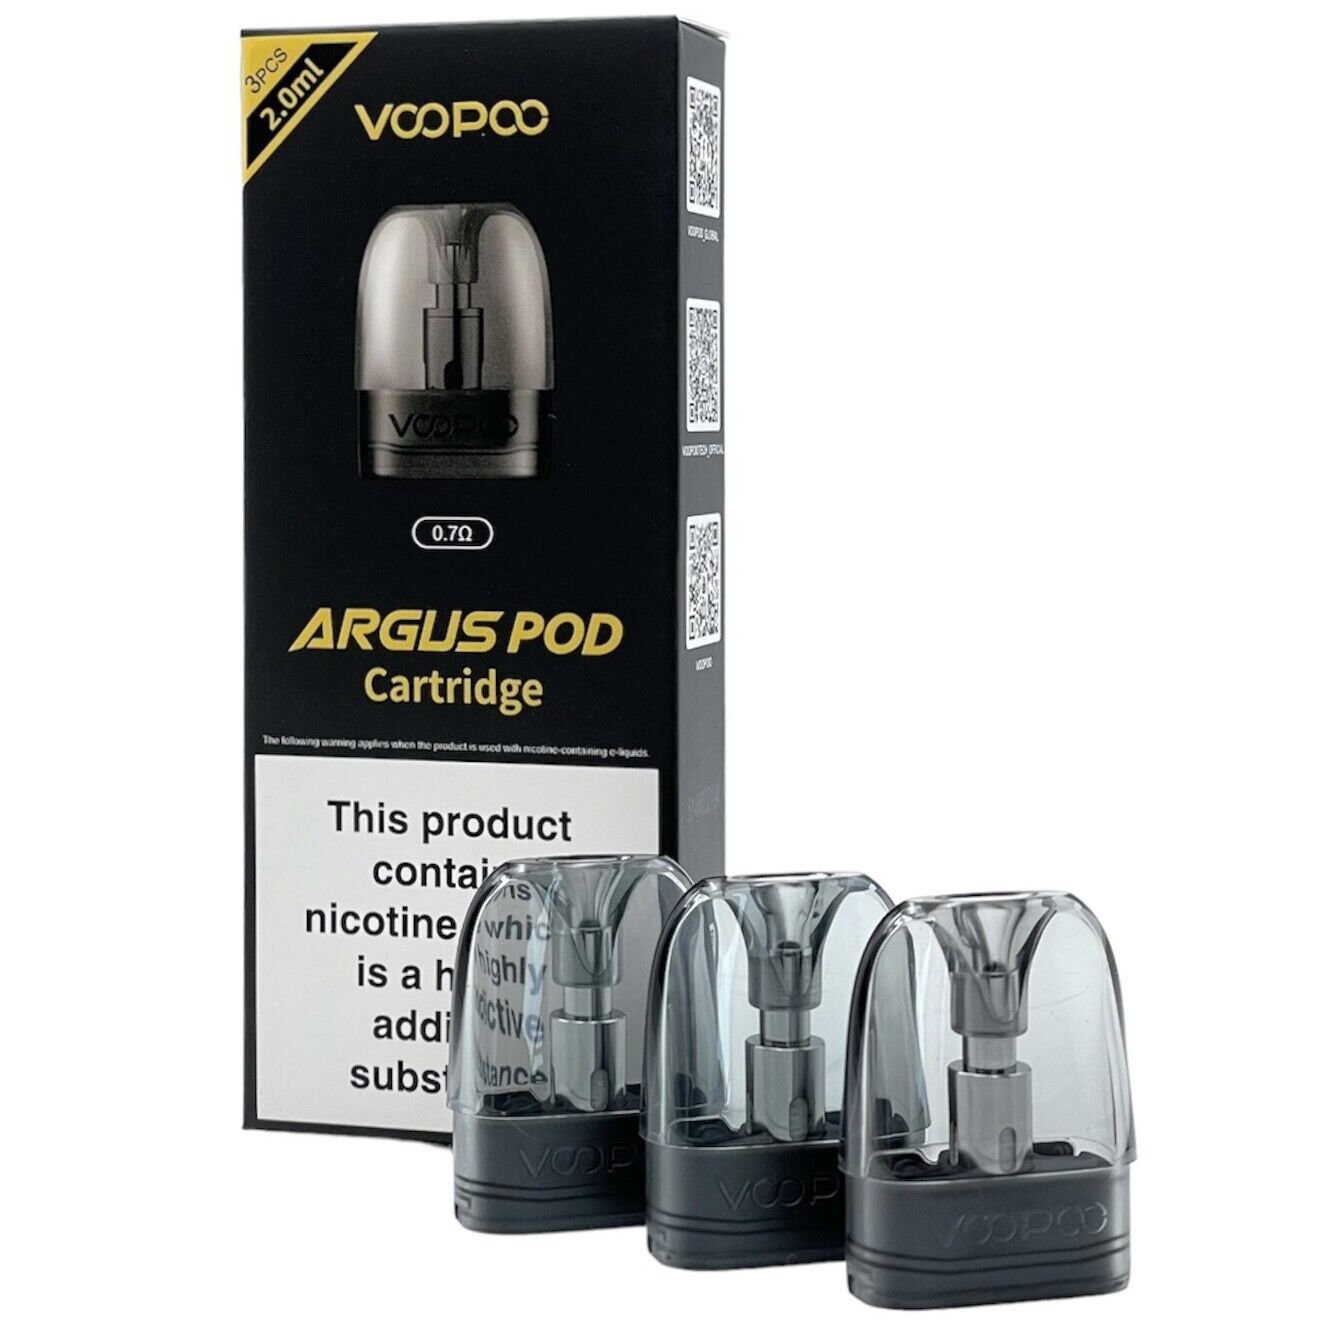 Voopoo Argus Pods (3 pods) - Explore a wide range of e-liquids, vape kits, accessories, and coils for vapers of all levels - Vape Saloon